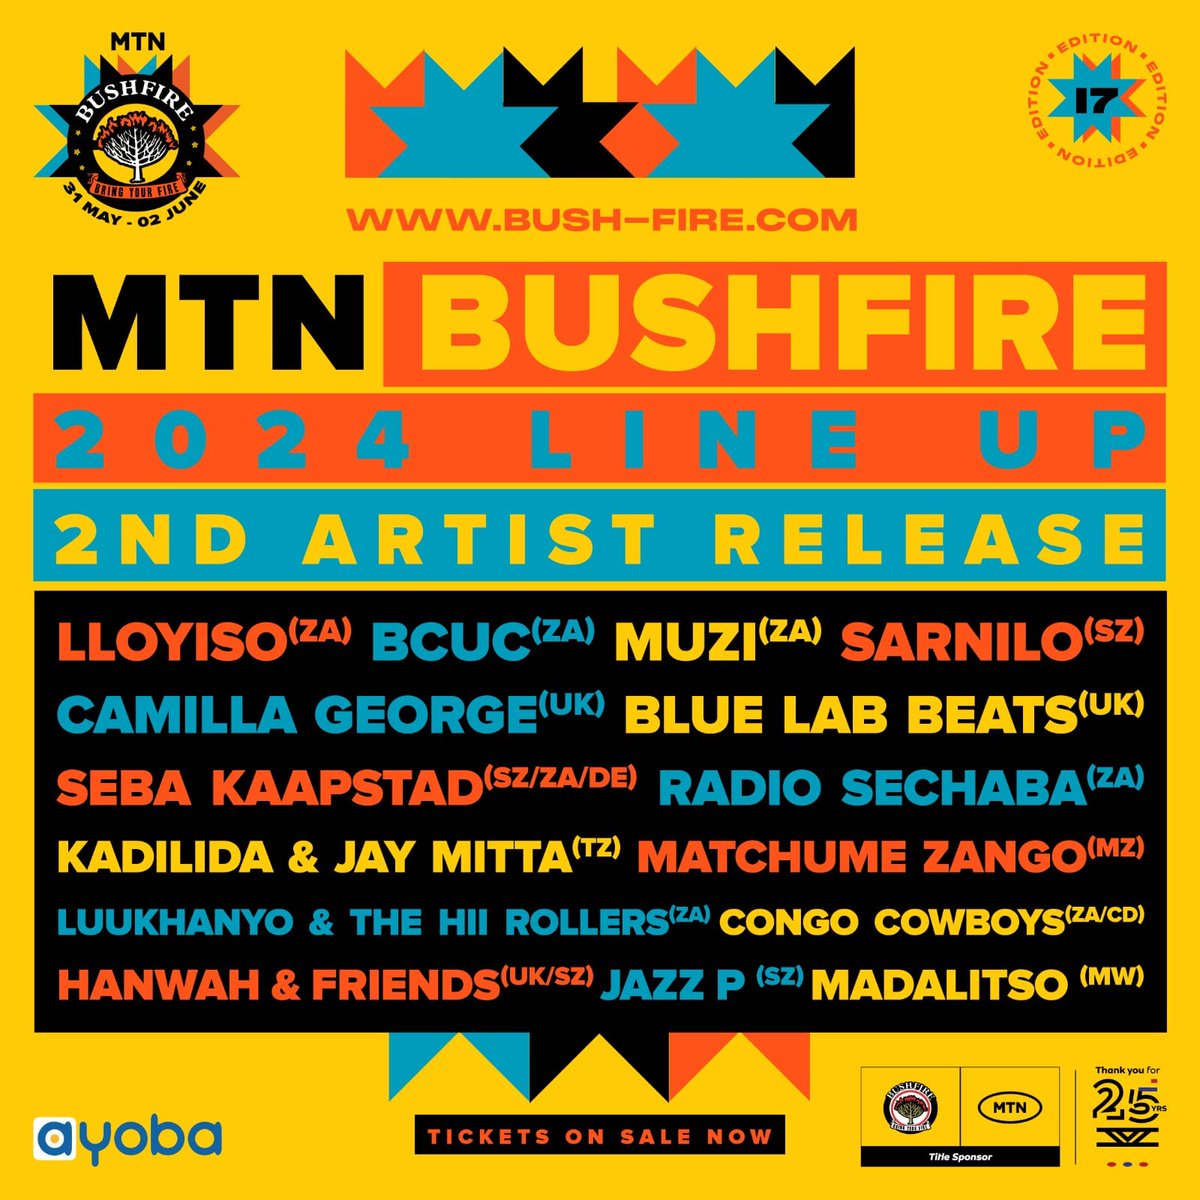 Presenting yet another melting pot of cultural fusion, diversity and authenticity! 🔥 Tickets: bush-fire.com/tickets/. Eswatini Fire Starters can still get discounted tickets via MTN MoMo Marketplace - Send 'Hi' to 7808 4000 via WhatsApp. #BRINGYOURFIRE #MTNBUSHFIRE2024